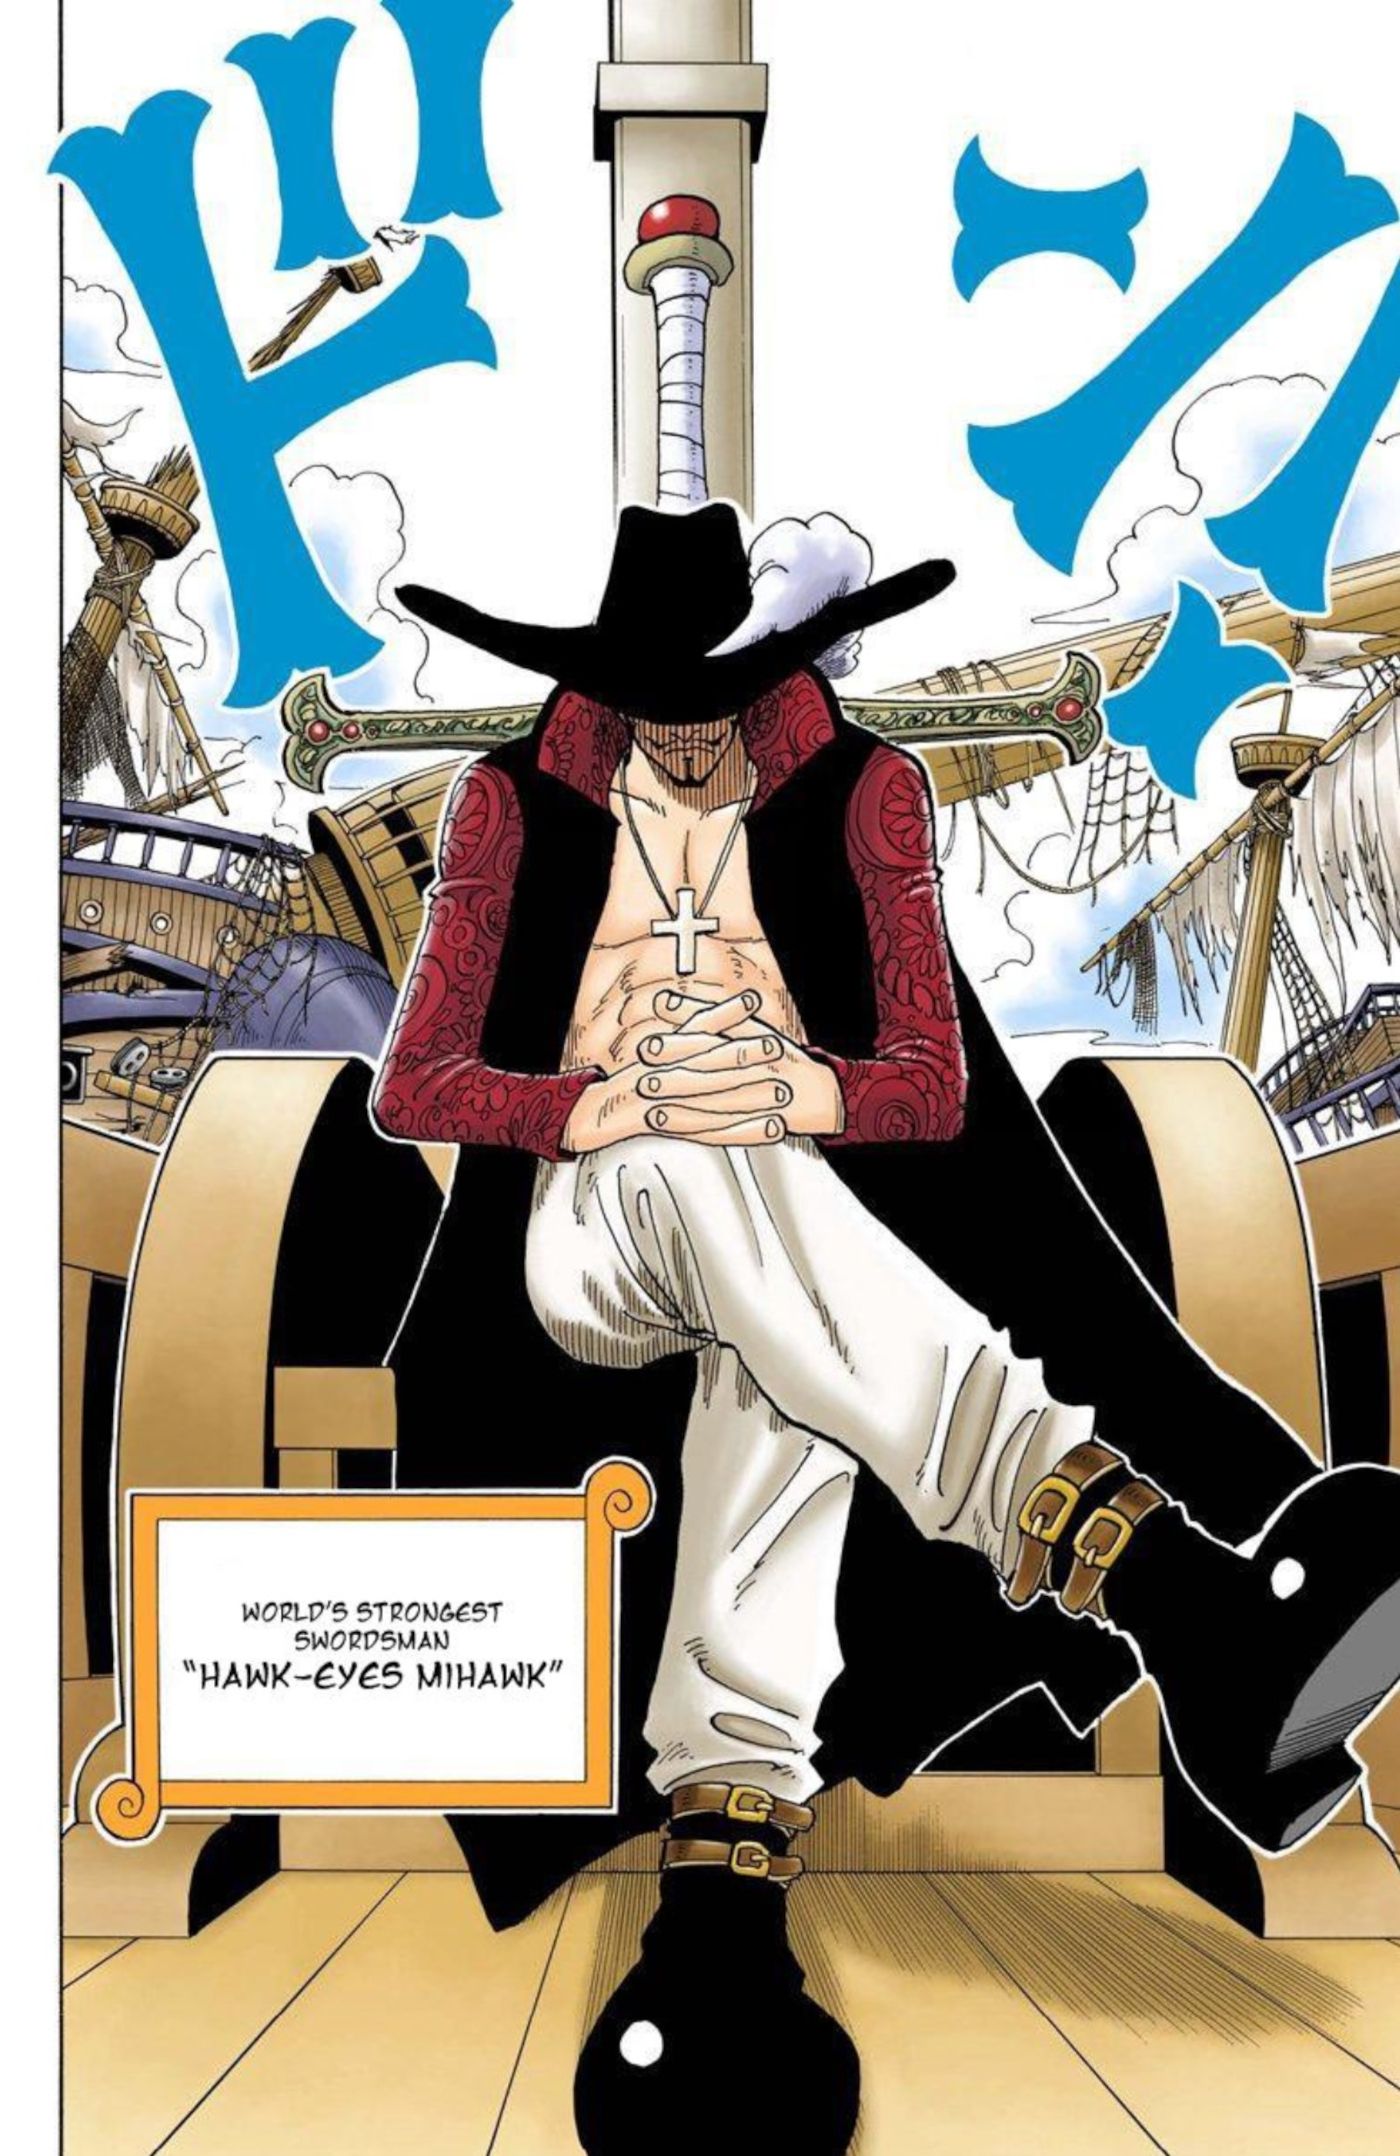 Colored manga panel from One Piece chapter 50 shows Mihawk sitting on his small one-man ship with his hat covering his eyes, fingers crossed, and giant sword on his back. Pieces of a giant ship floating behind him.